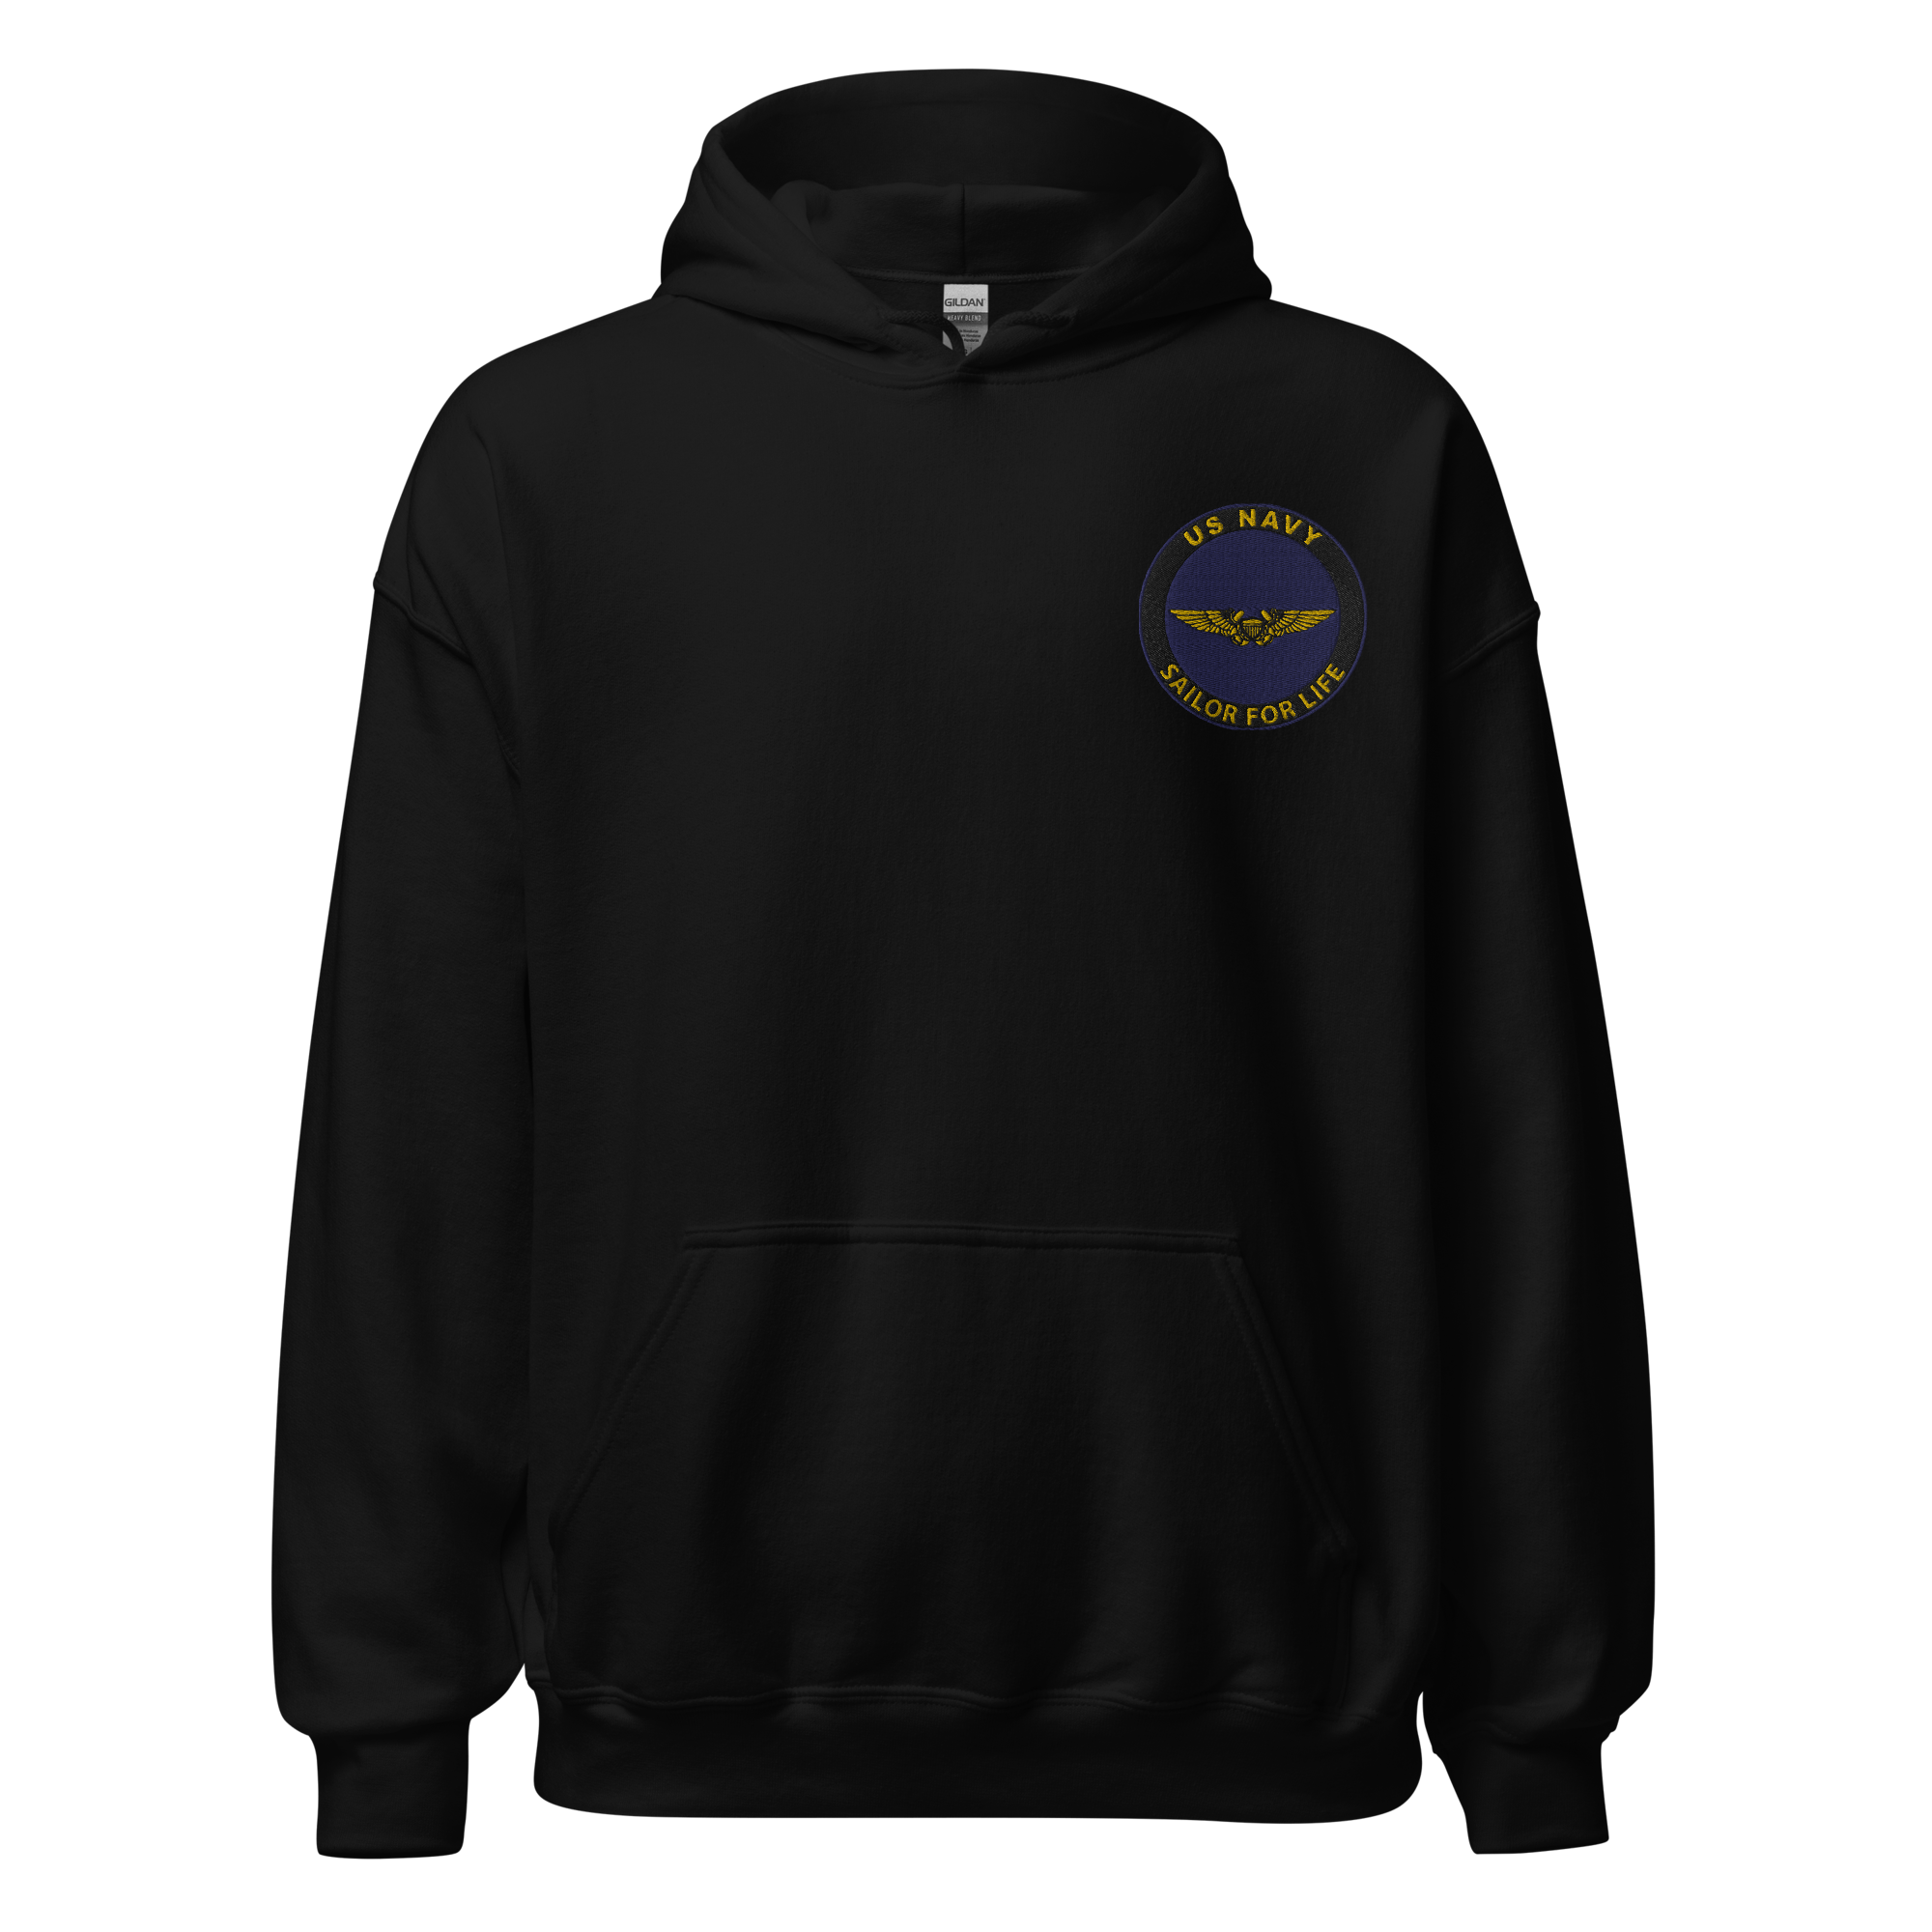 Custom US Navy Ranks, Insignia Sailor For Life Embroidered Unisex Hoodie